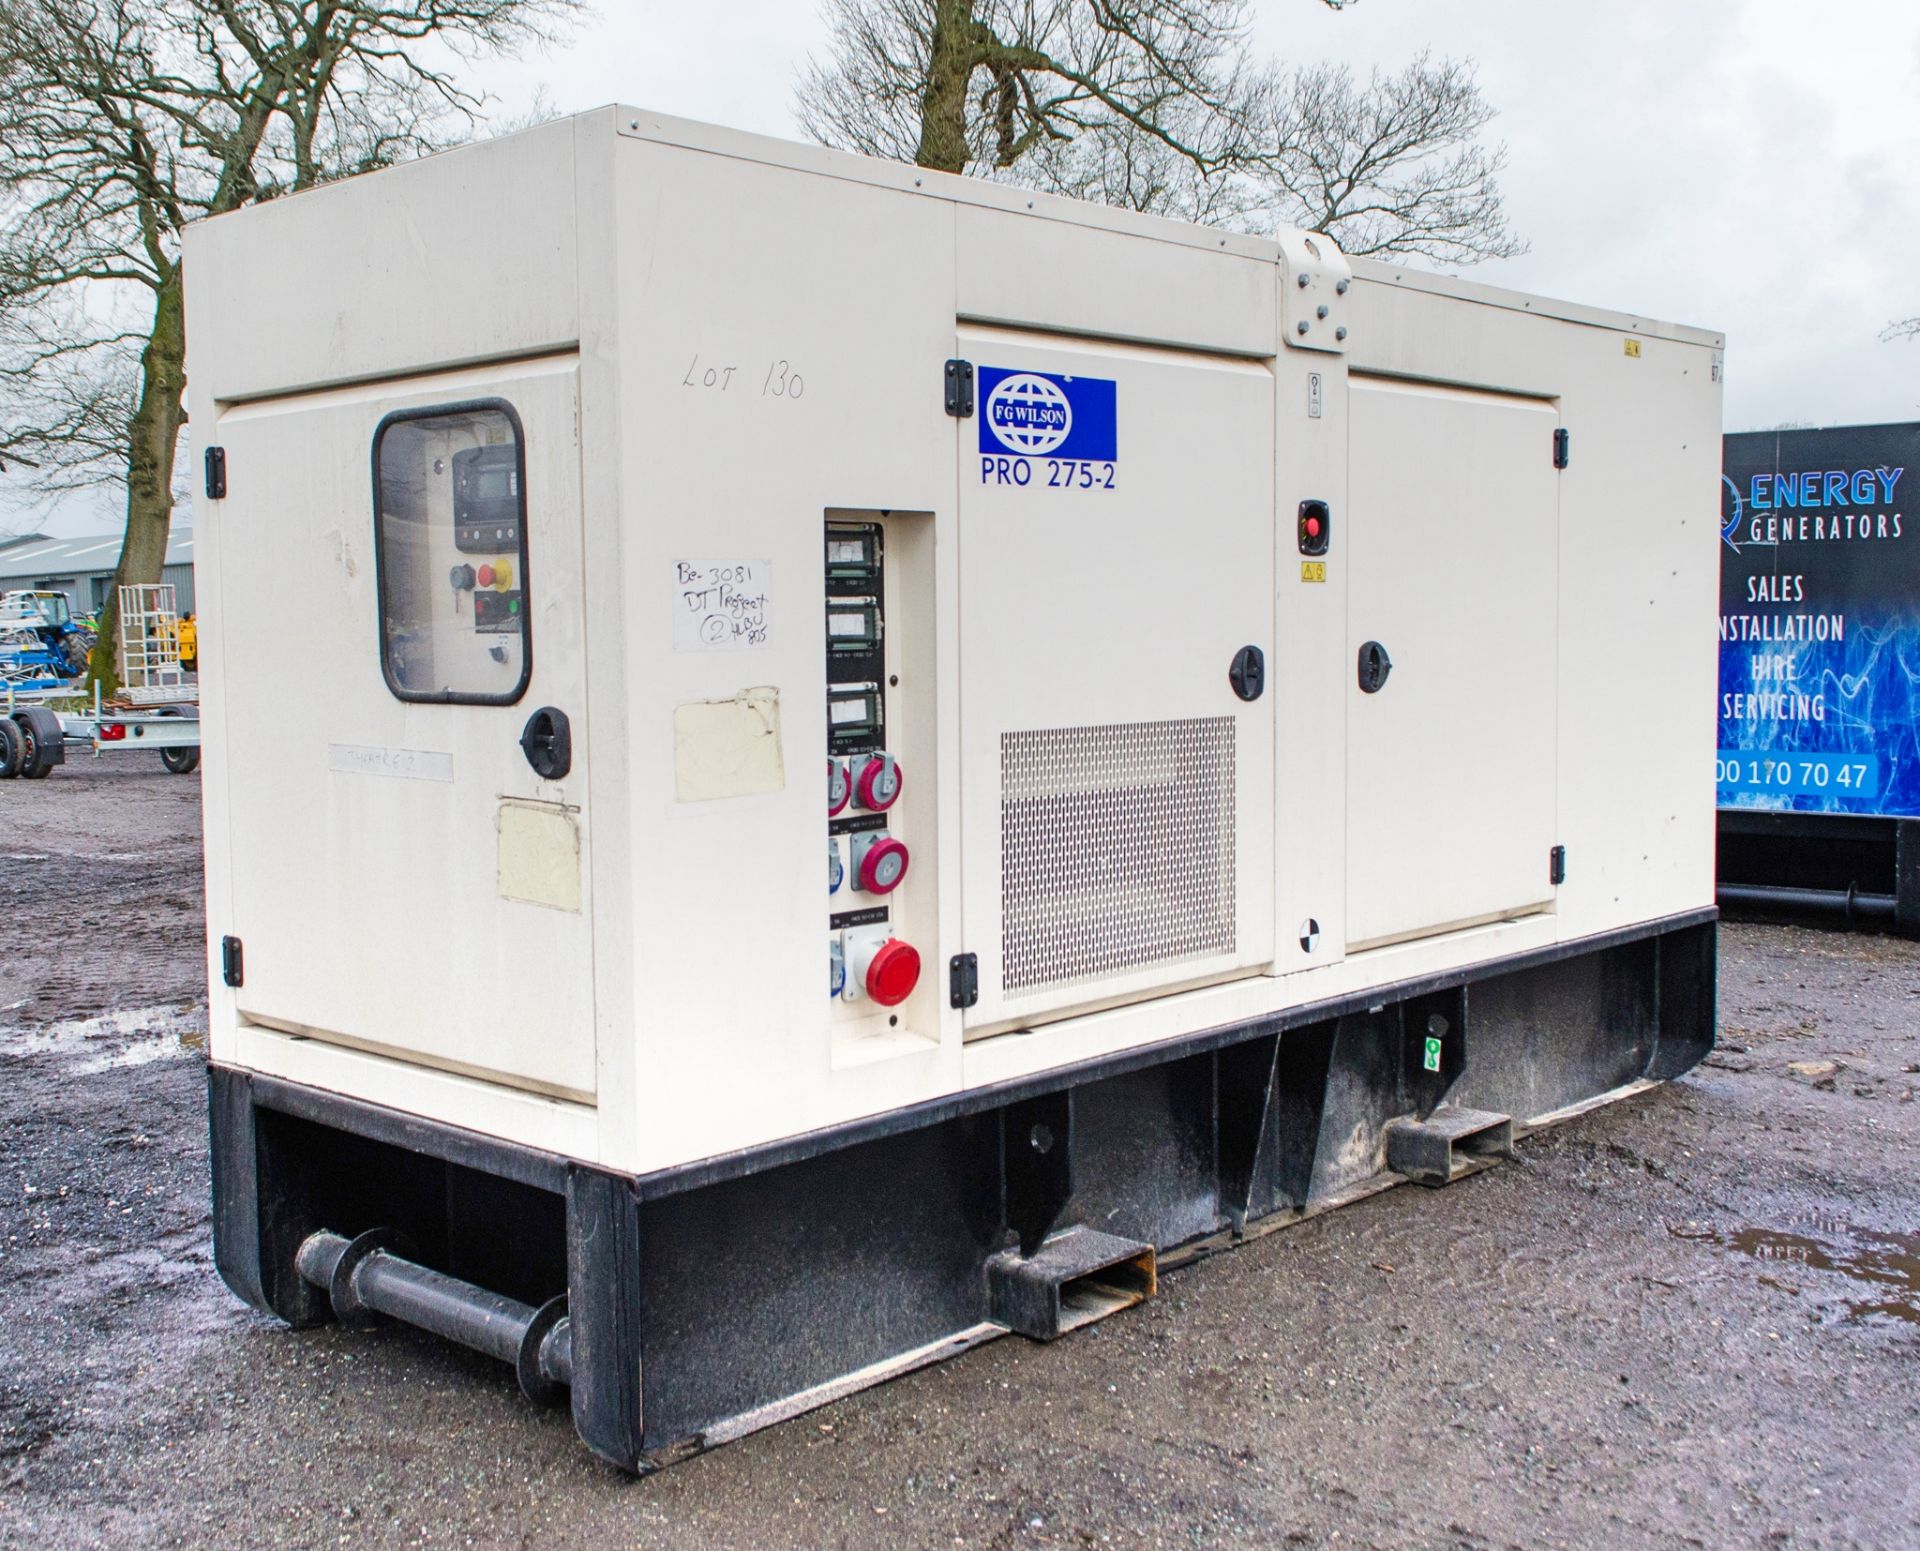 FG Wilson PRO 275-2 275 kva diesel driven generator Year: 2020 S/N: FGWGS956PXP600353 Recorded